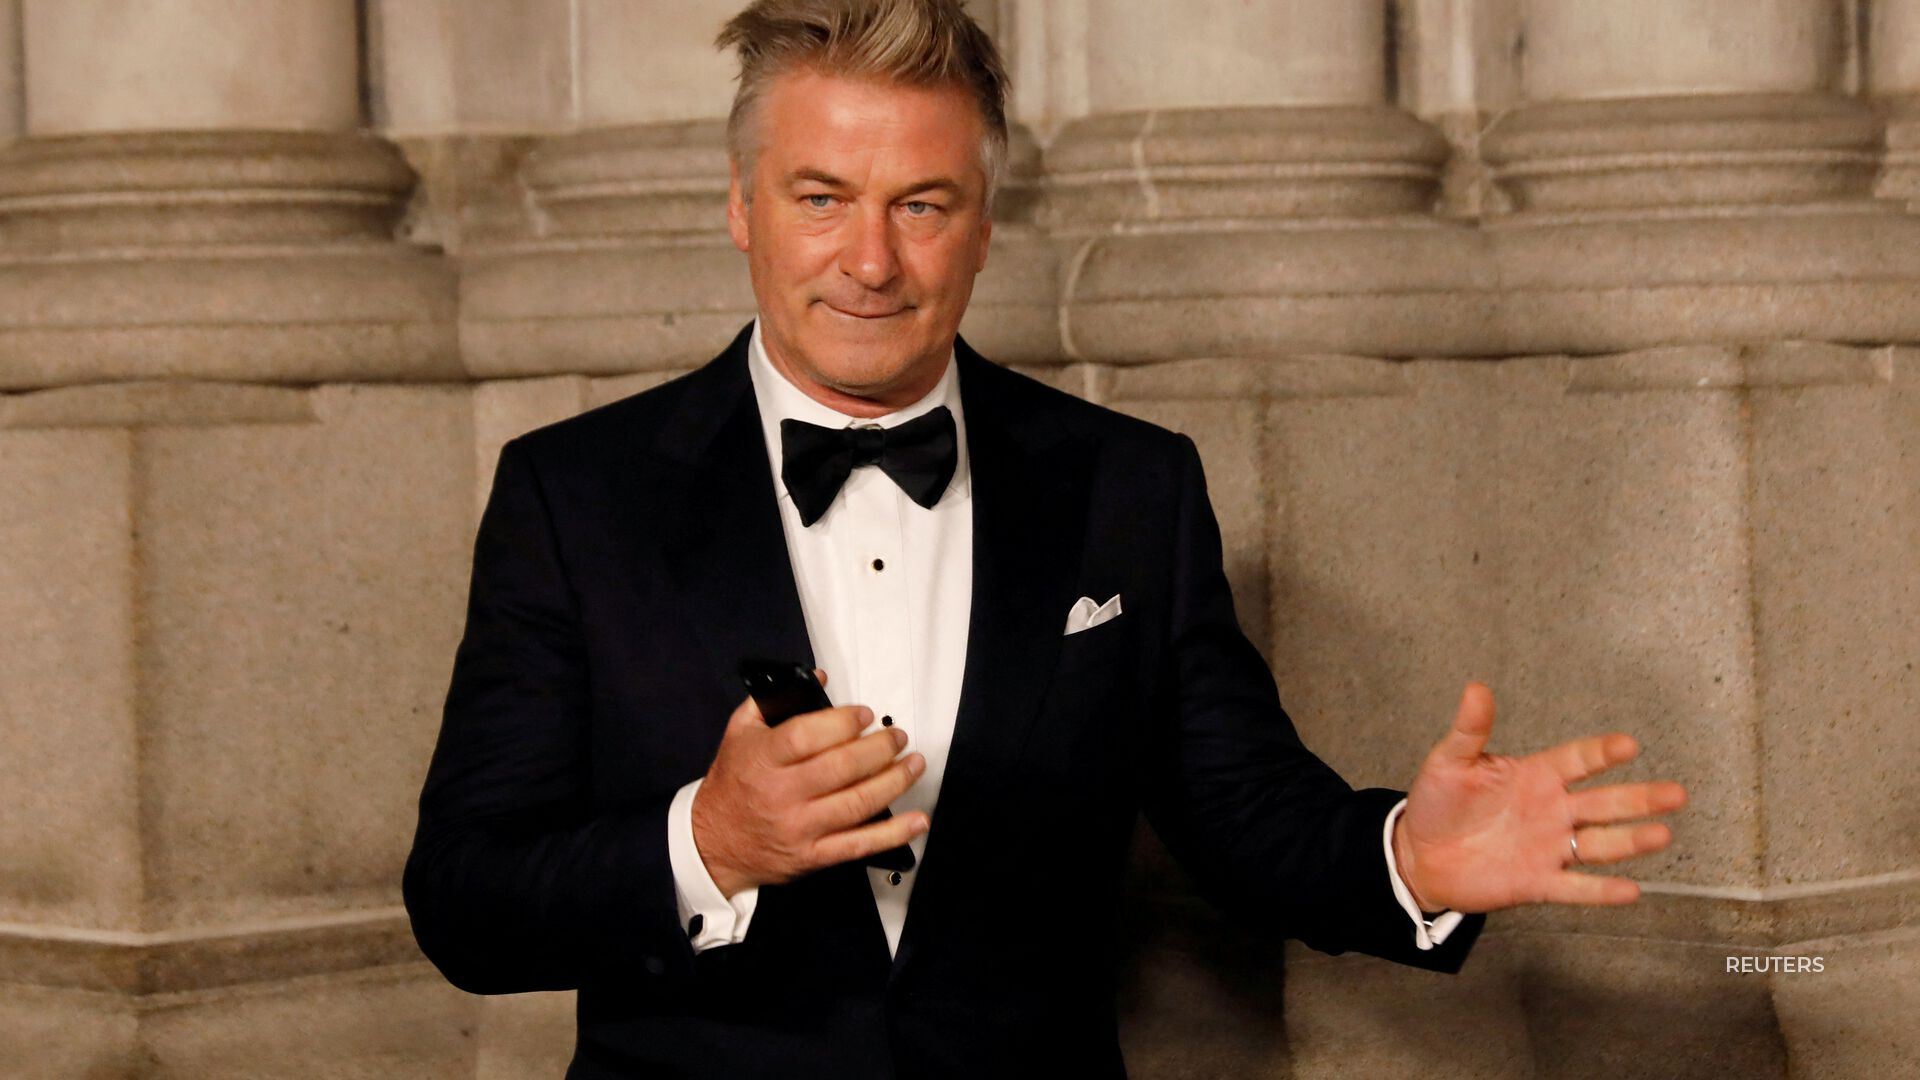 In an arbitration filing, Alec Baldwin said he is protected from liability in the Rust shooting.